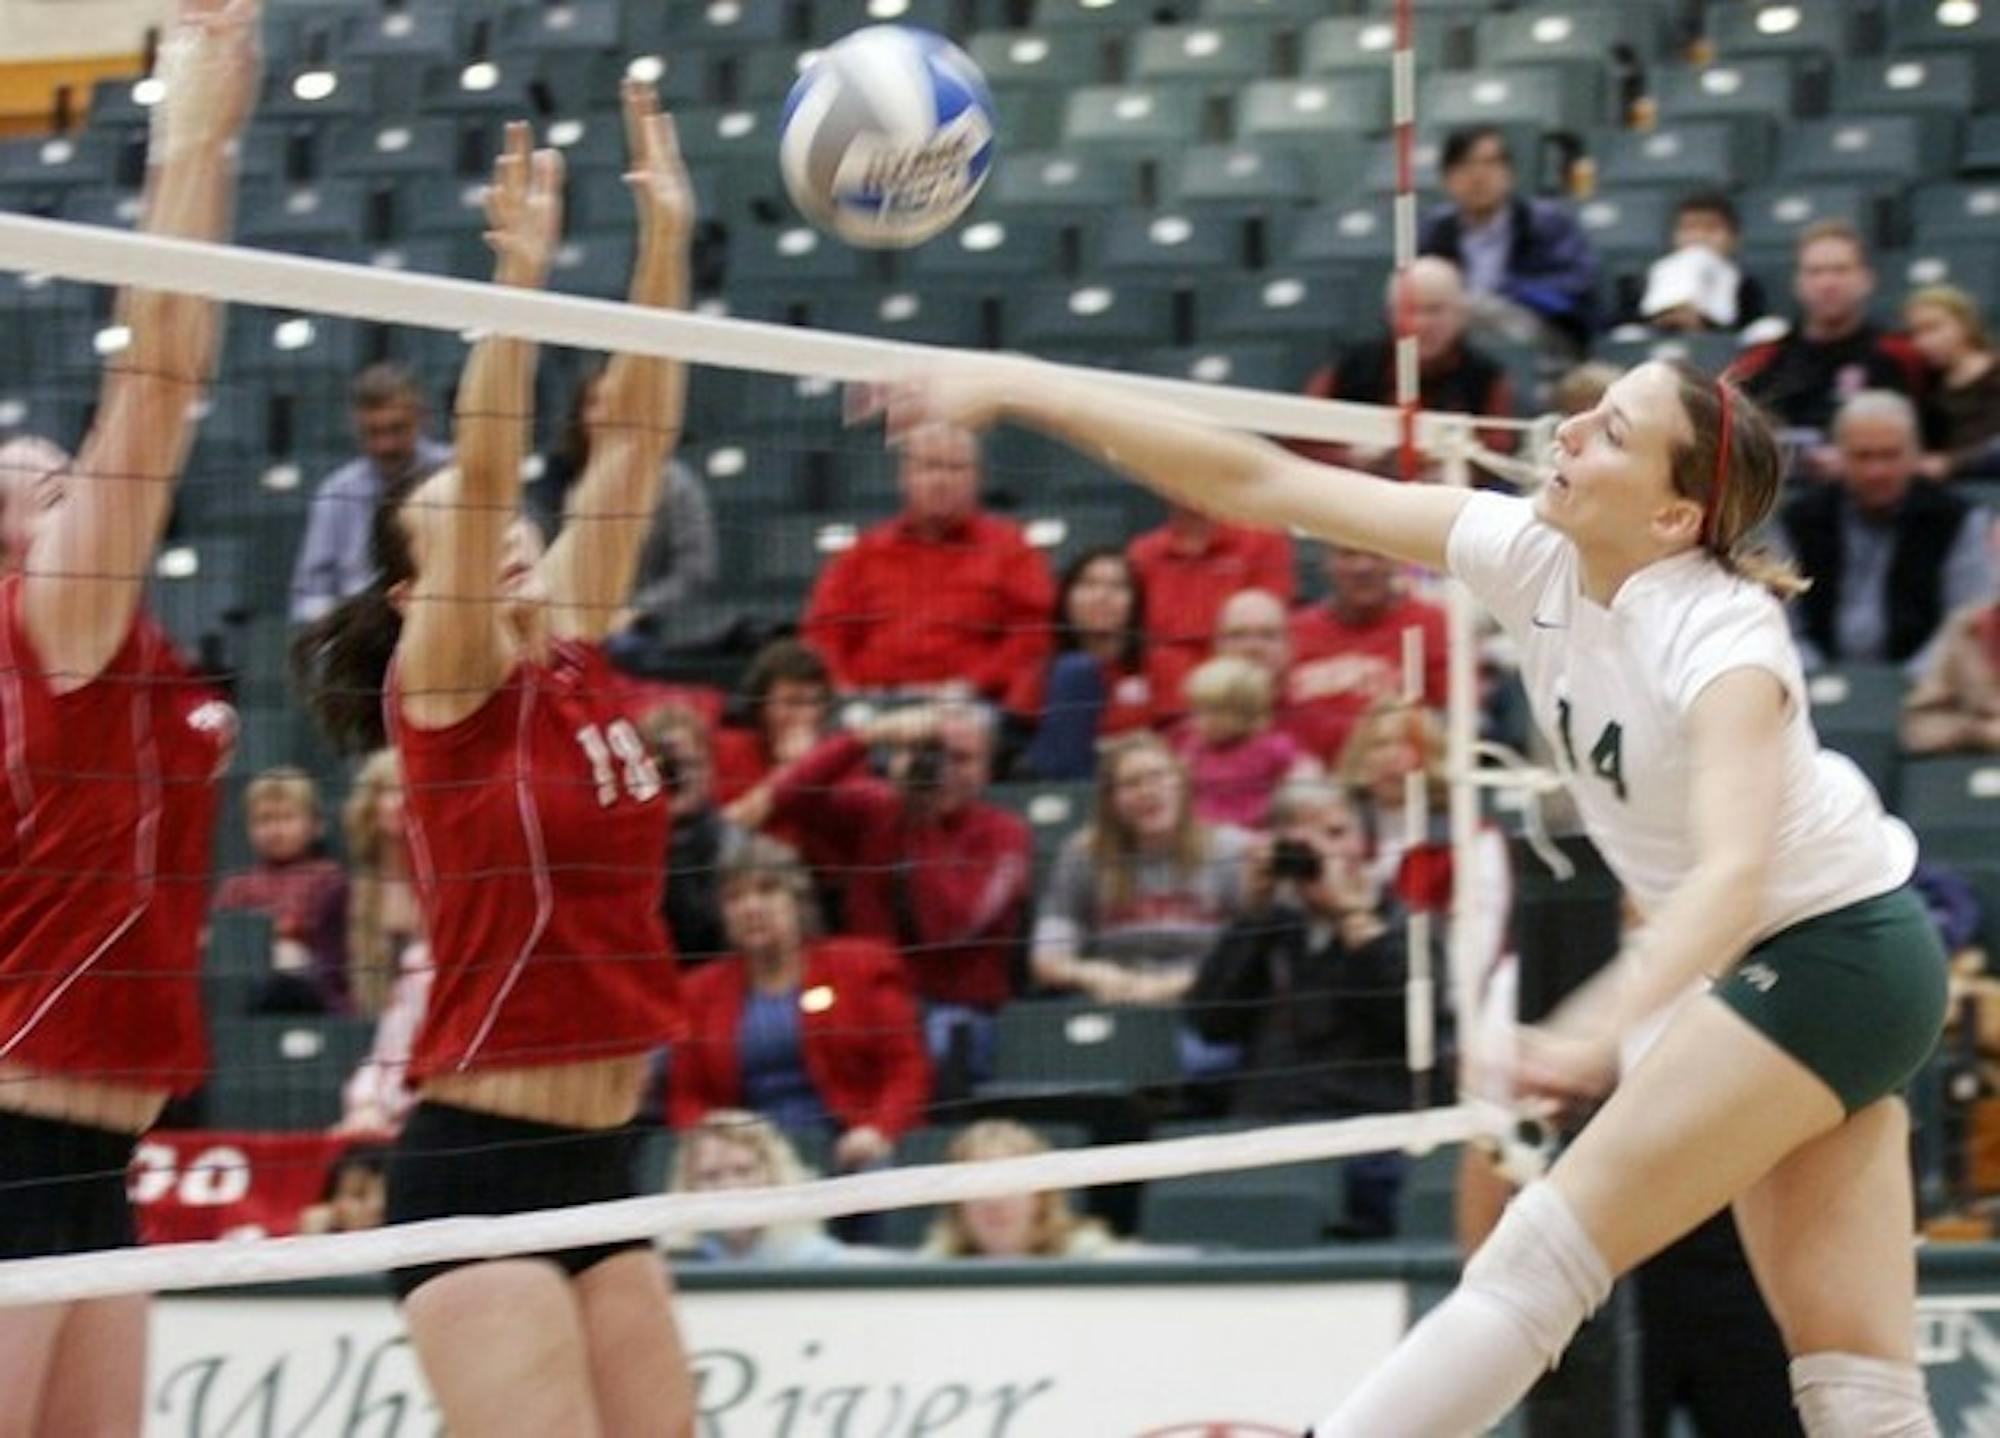 Women's volleyball ends season on high note with win over Brown after the team lost to Yale the previous night.